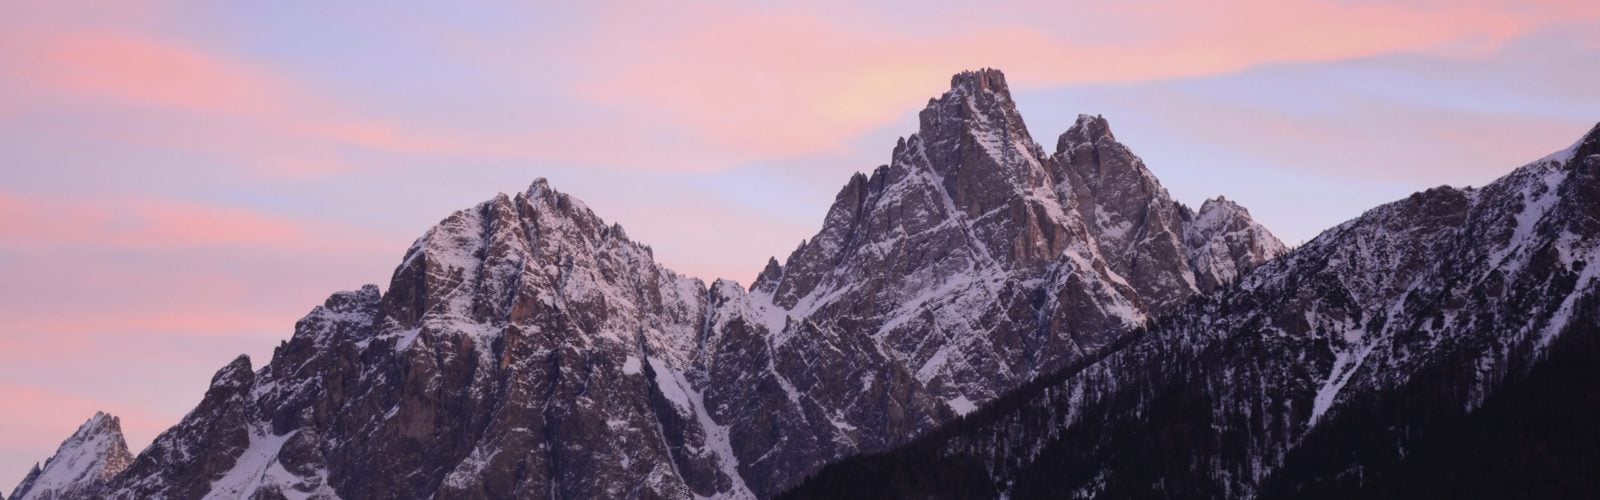 Snow-capped peaks of the Dolomites, Italy, drenched in a pink sunset